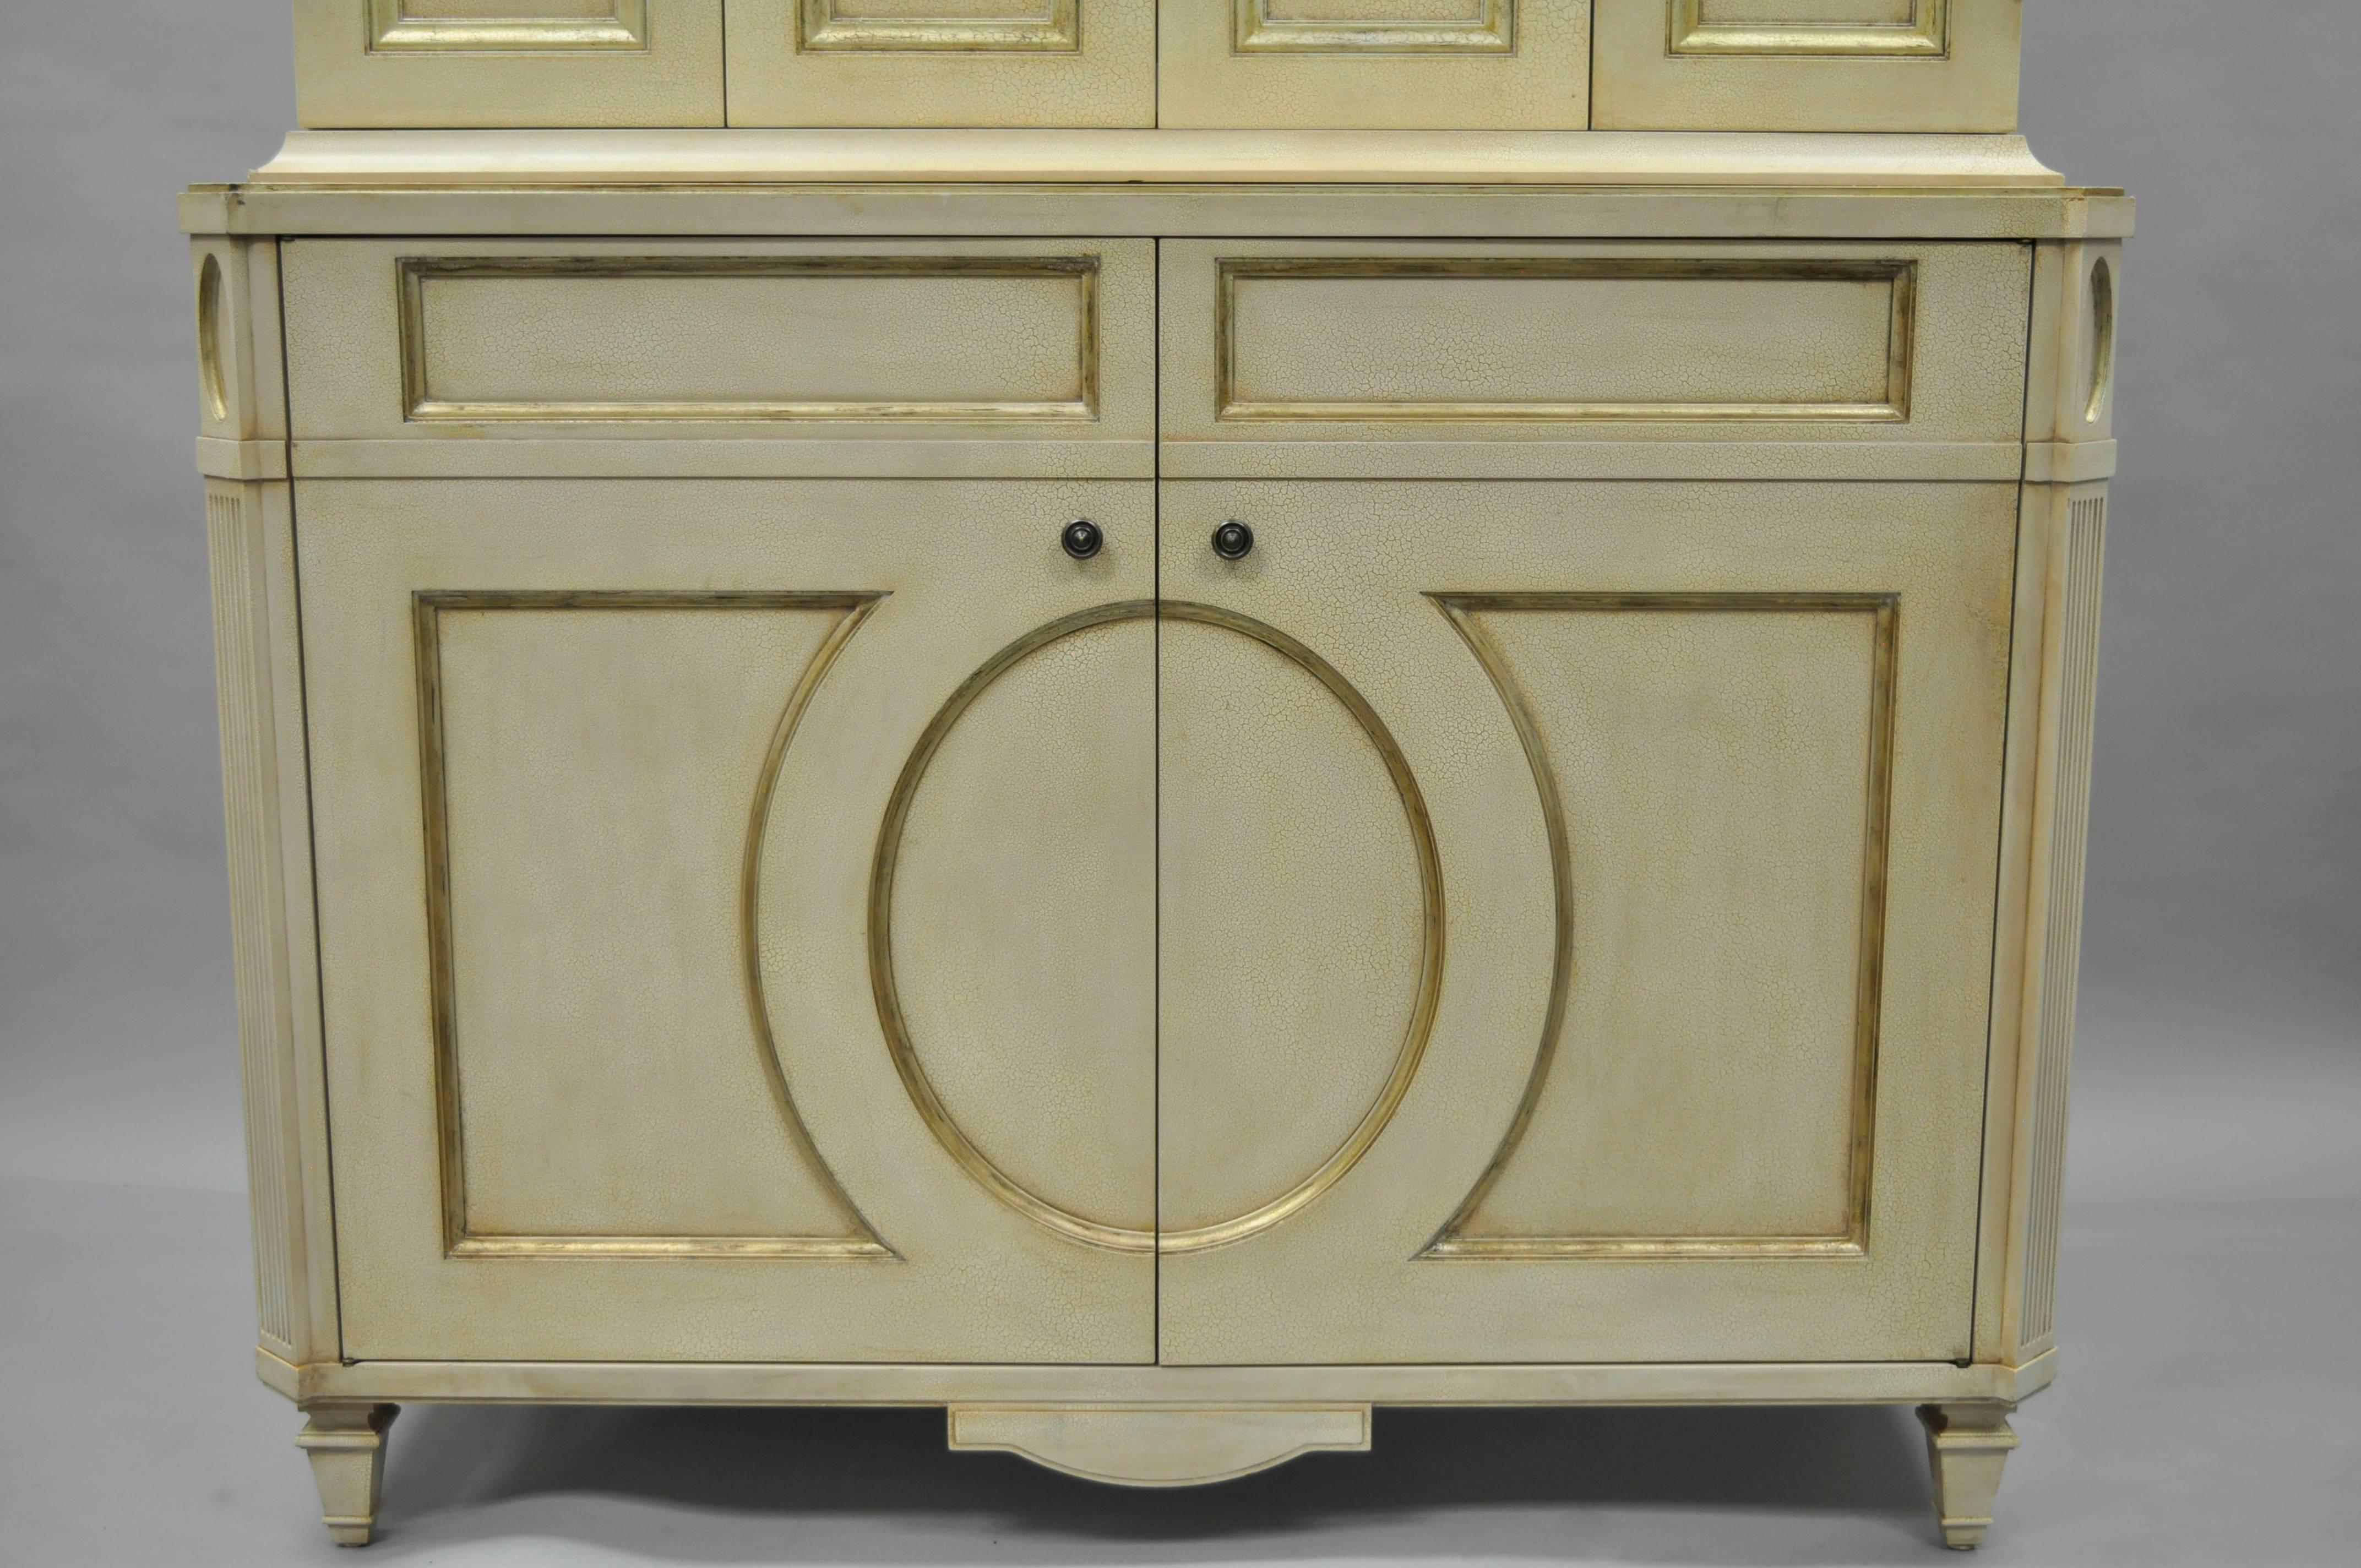 20th Century Directoire Neoclassical Style Cream and Gold Distress Painted Cabinet by Decca B For Sale